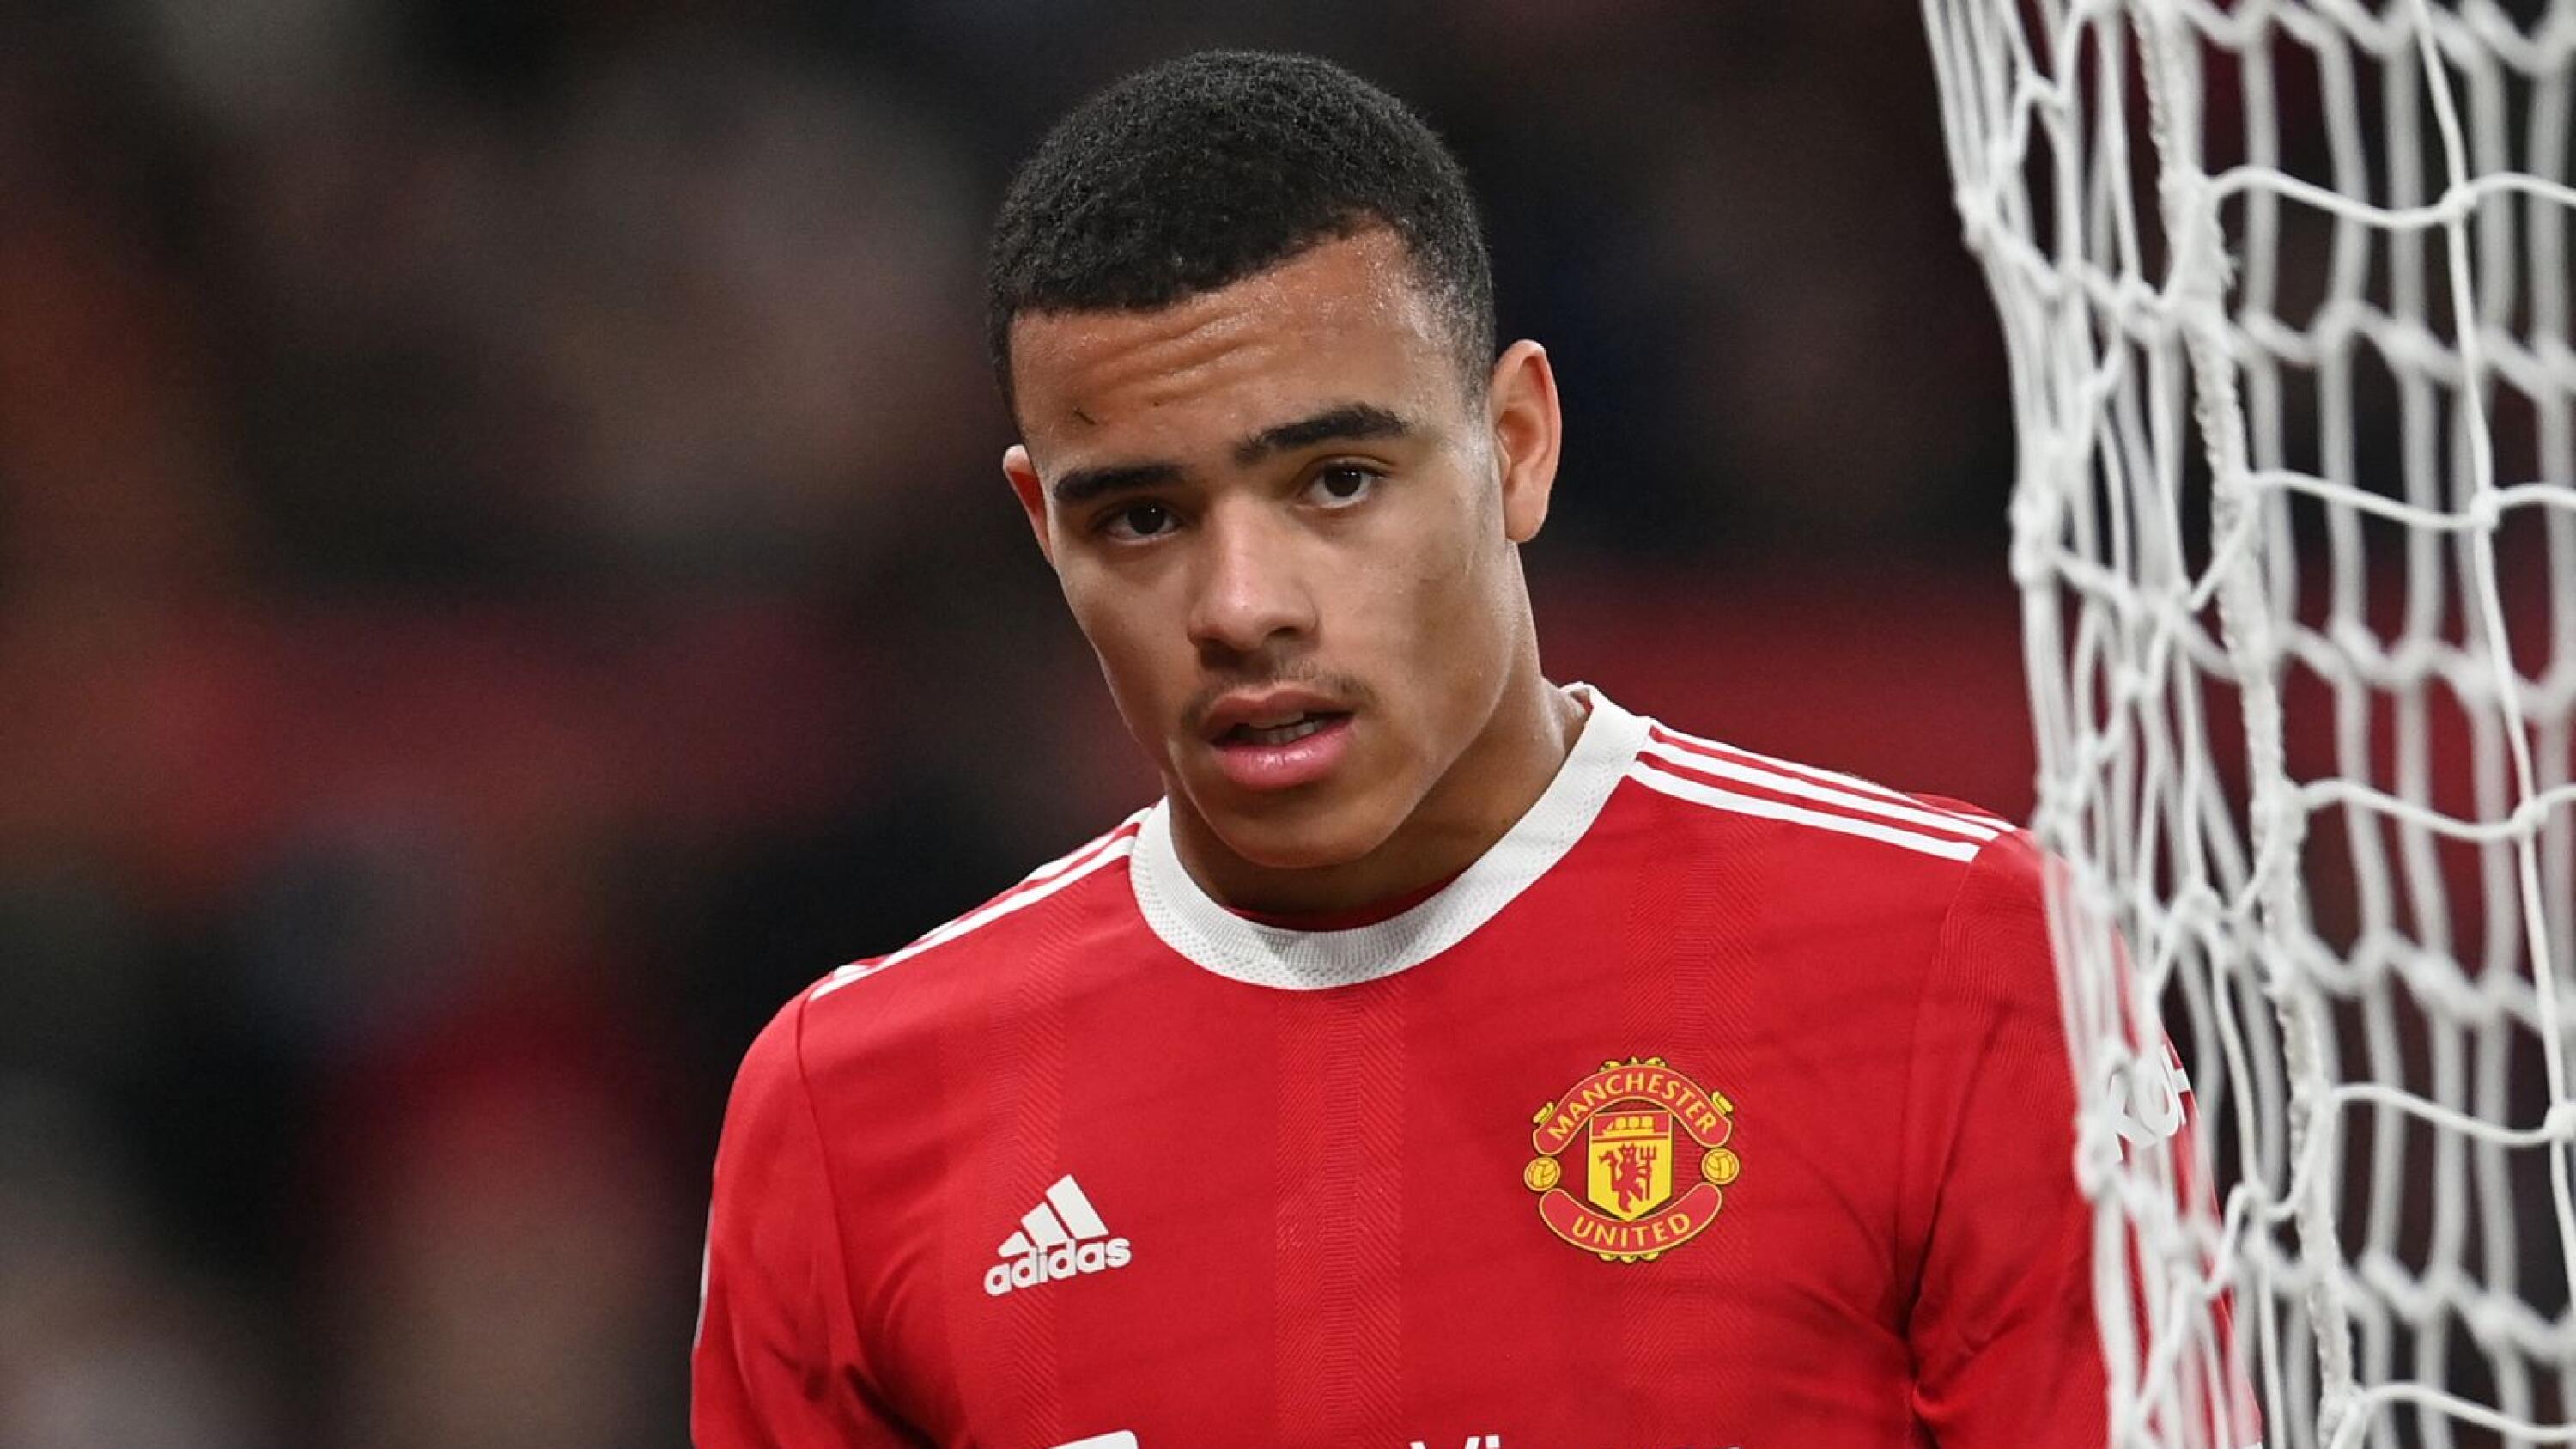 Greater Manchester police have announced that they’ve arrested Manchester United forward Mason Greenwood on suspision of rape and assault